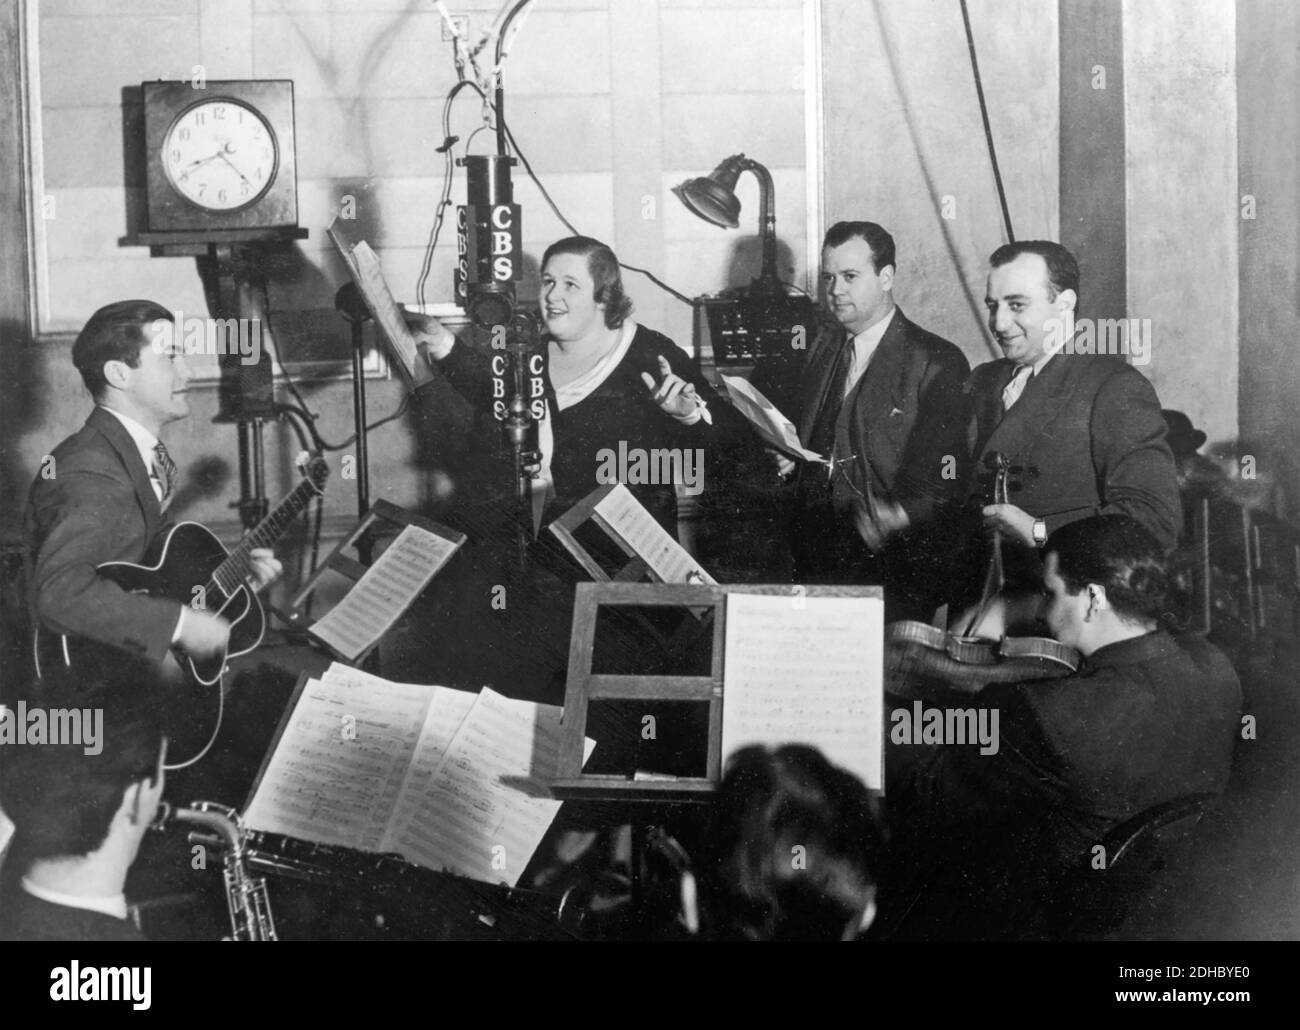 KATE SMITH (1907-1986) American soprano singer known for her version of Irving Berlin's 'God Bless America' in a recording studio about 1934. Stock Photo